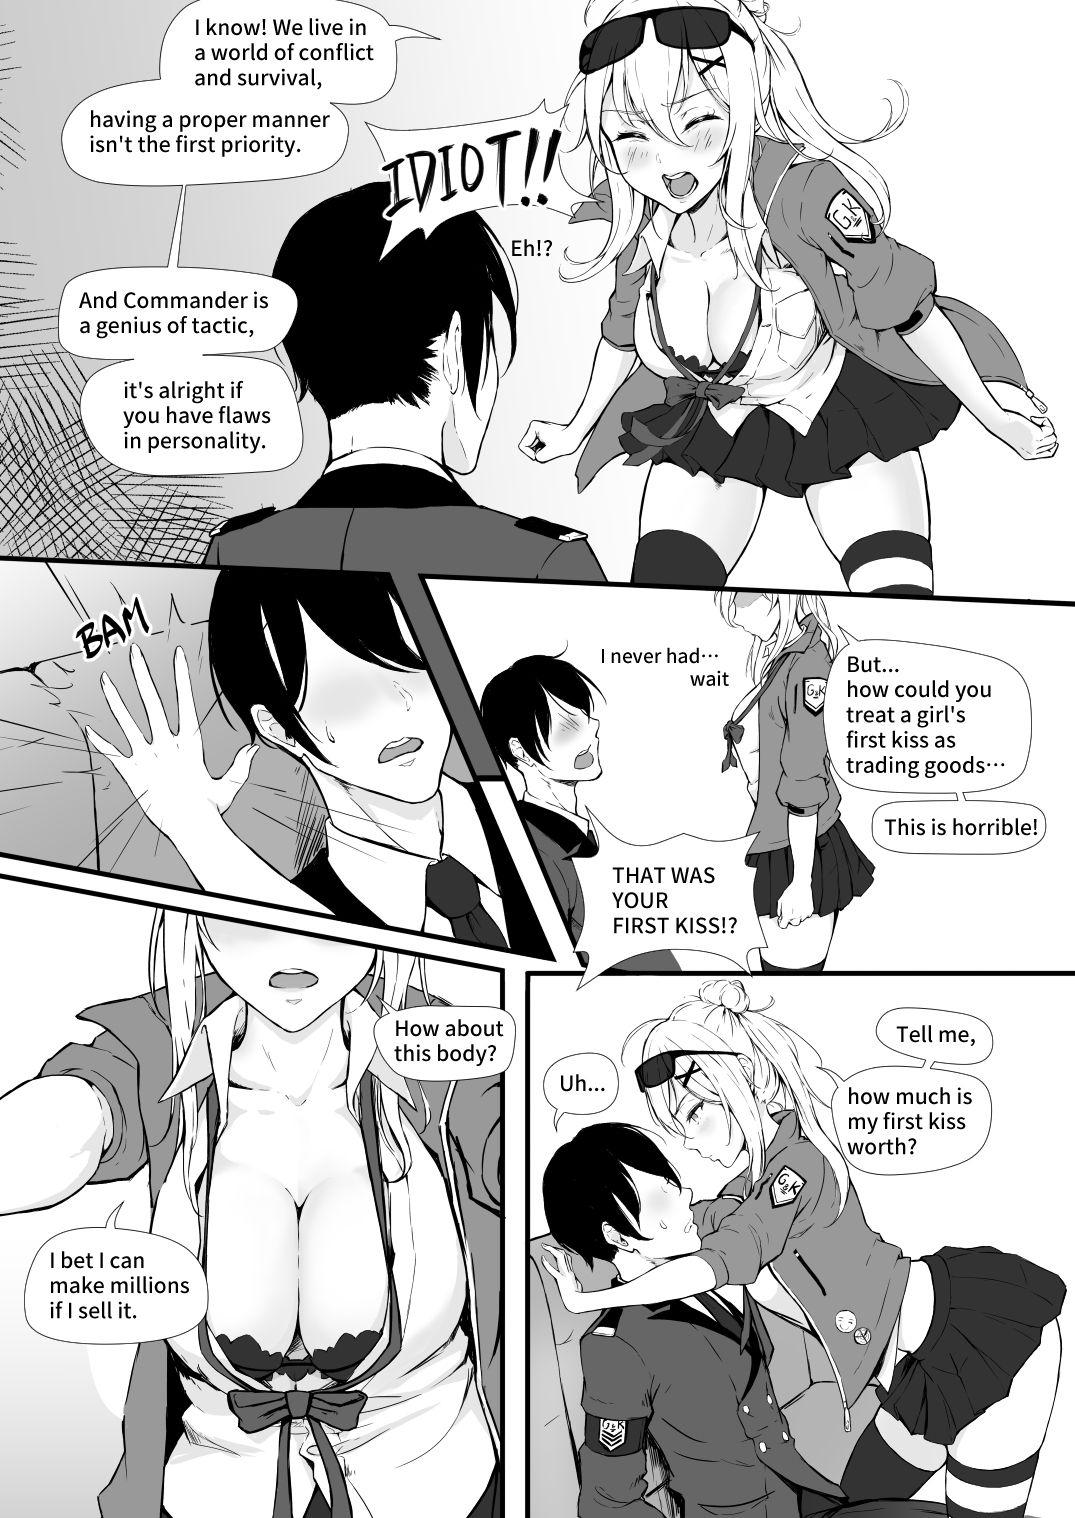 Skirt How Many Diamonds a Kiss Worth? - Girls frontline Family - Page 9